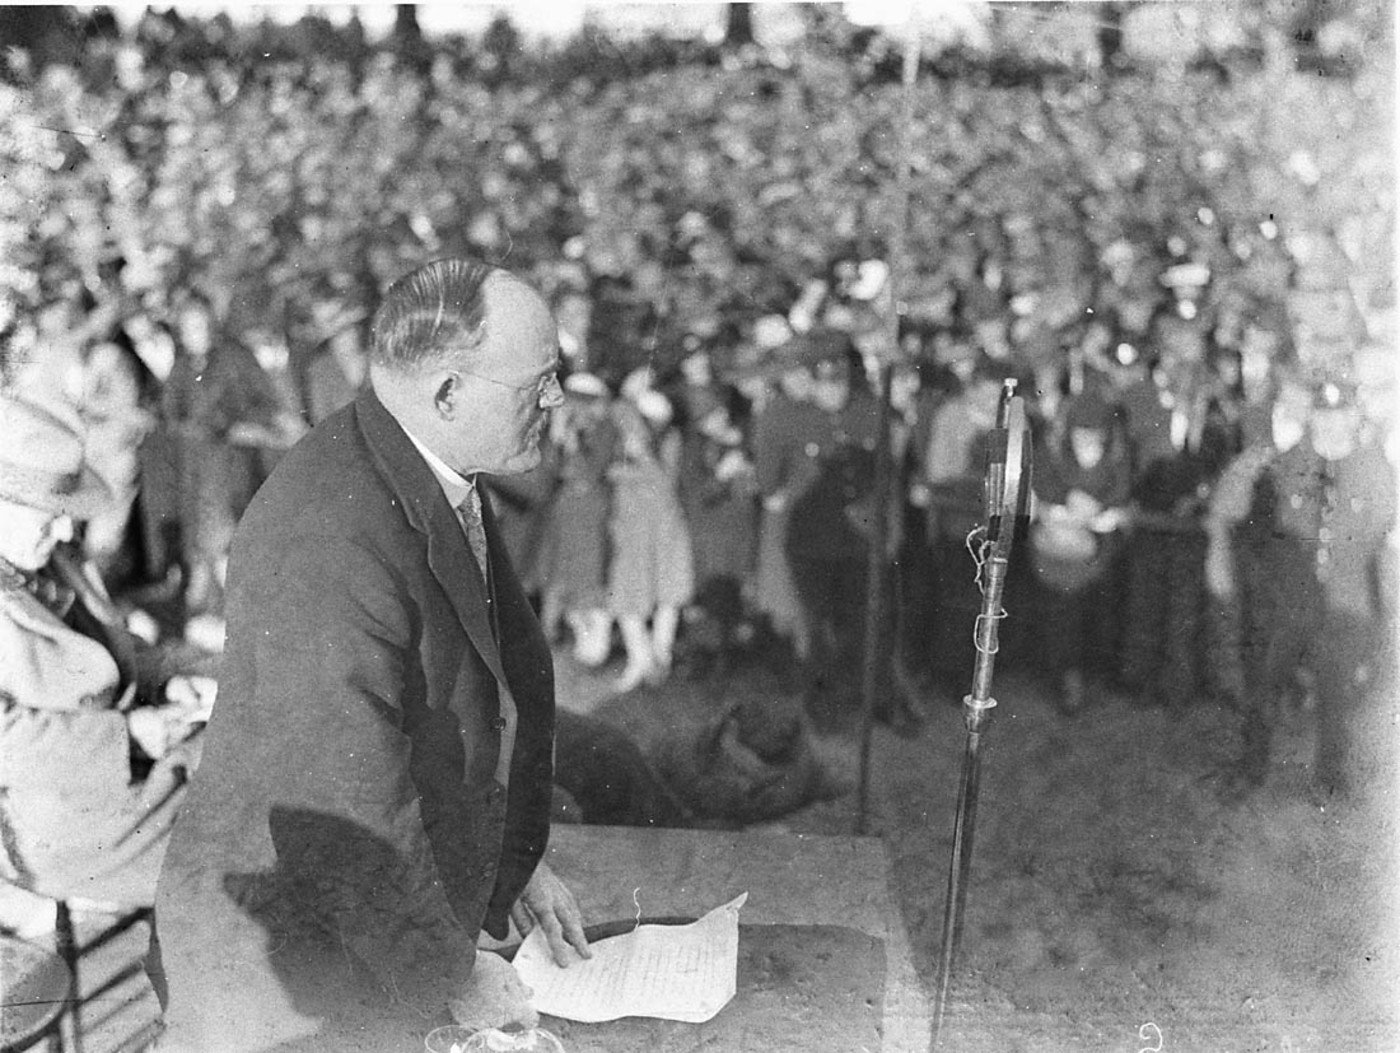 NSW Labor premier Jack Lang speaking in the early 1930s PHOTO: State Library of NSW